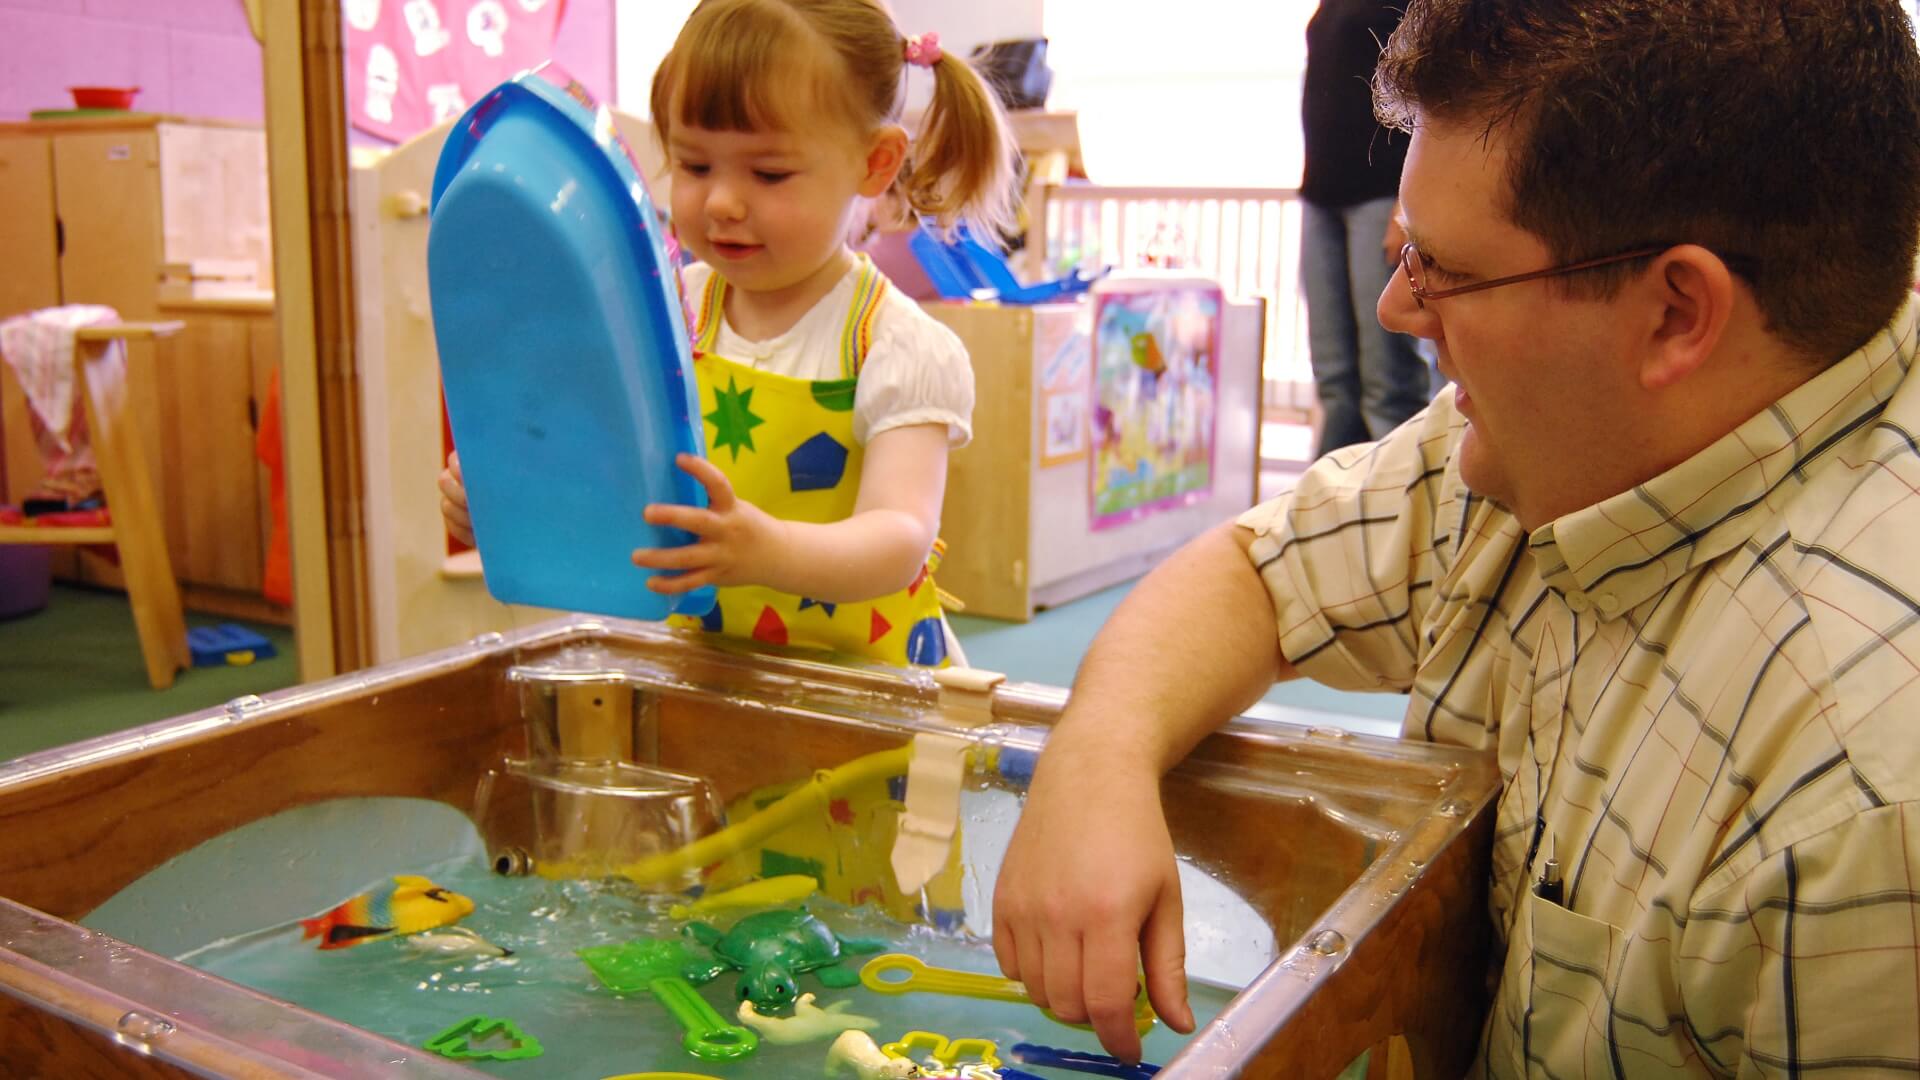 A student plays with a young child as they tip water from a toy boat into a sink full of water and floating toys.